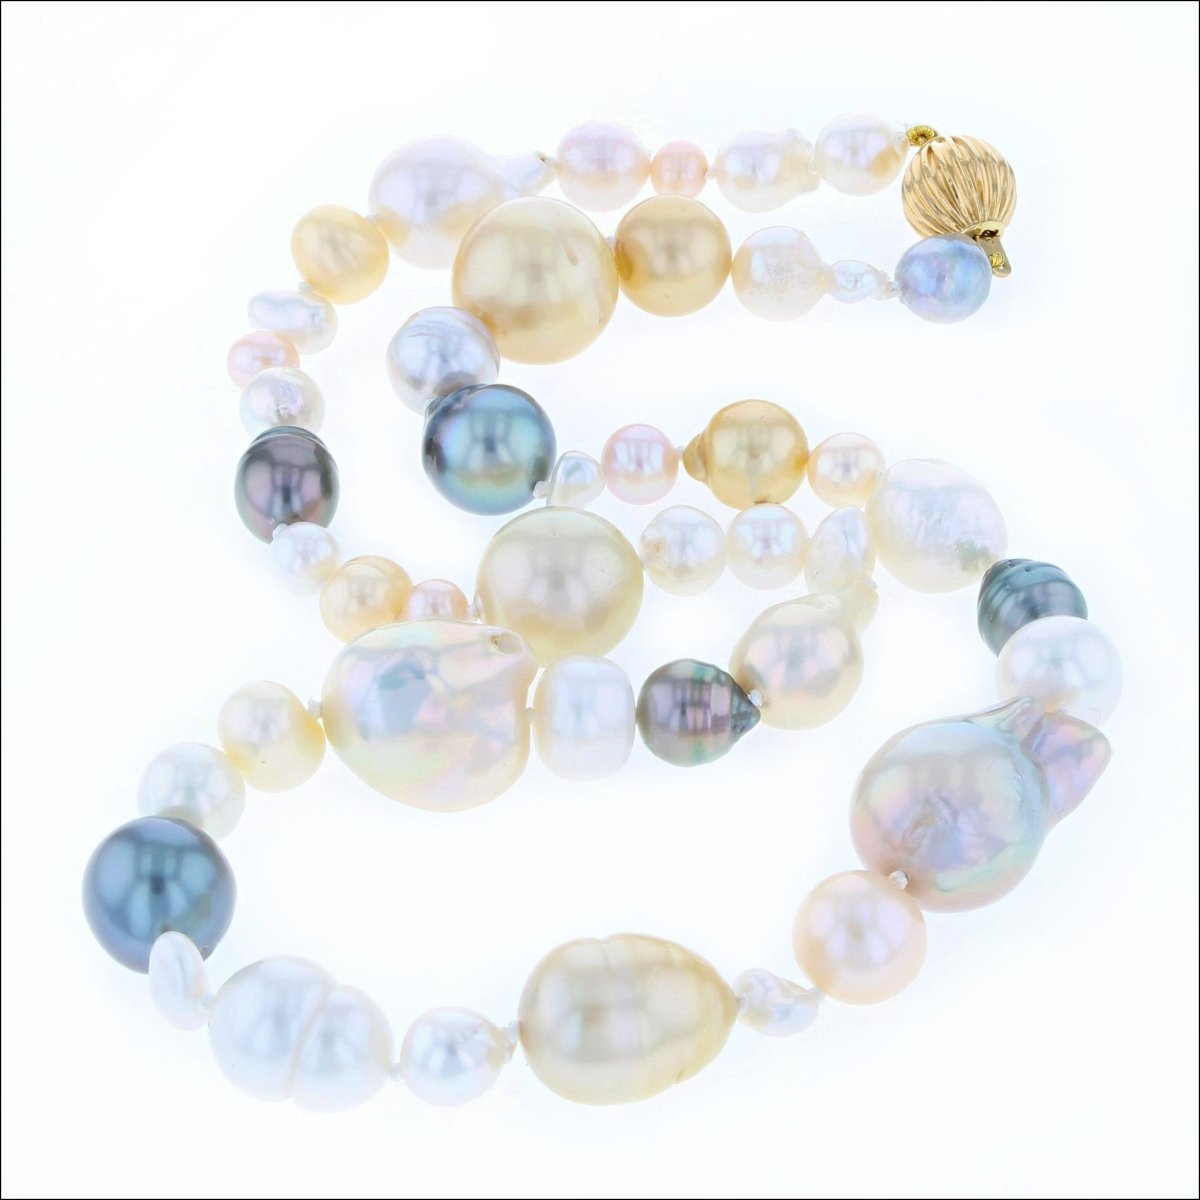 Tahitian South Sea and Freshwater Pearl Multi-Colored Strand 18KY 18" - JewelsmithNecklaces